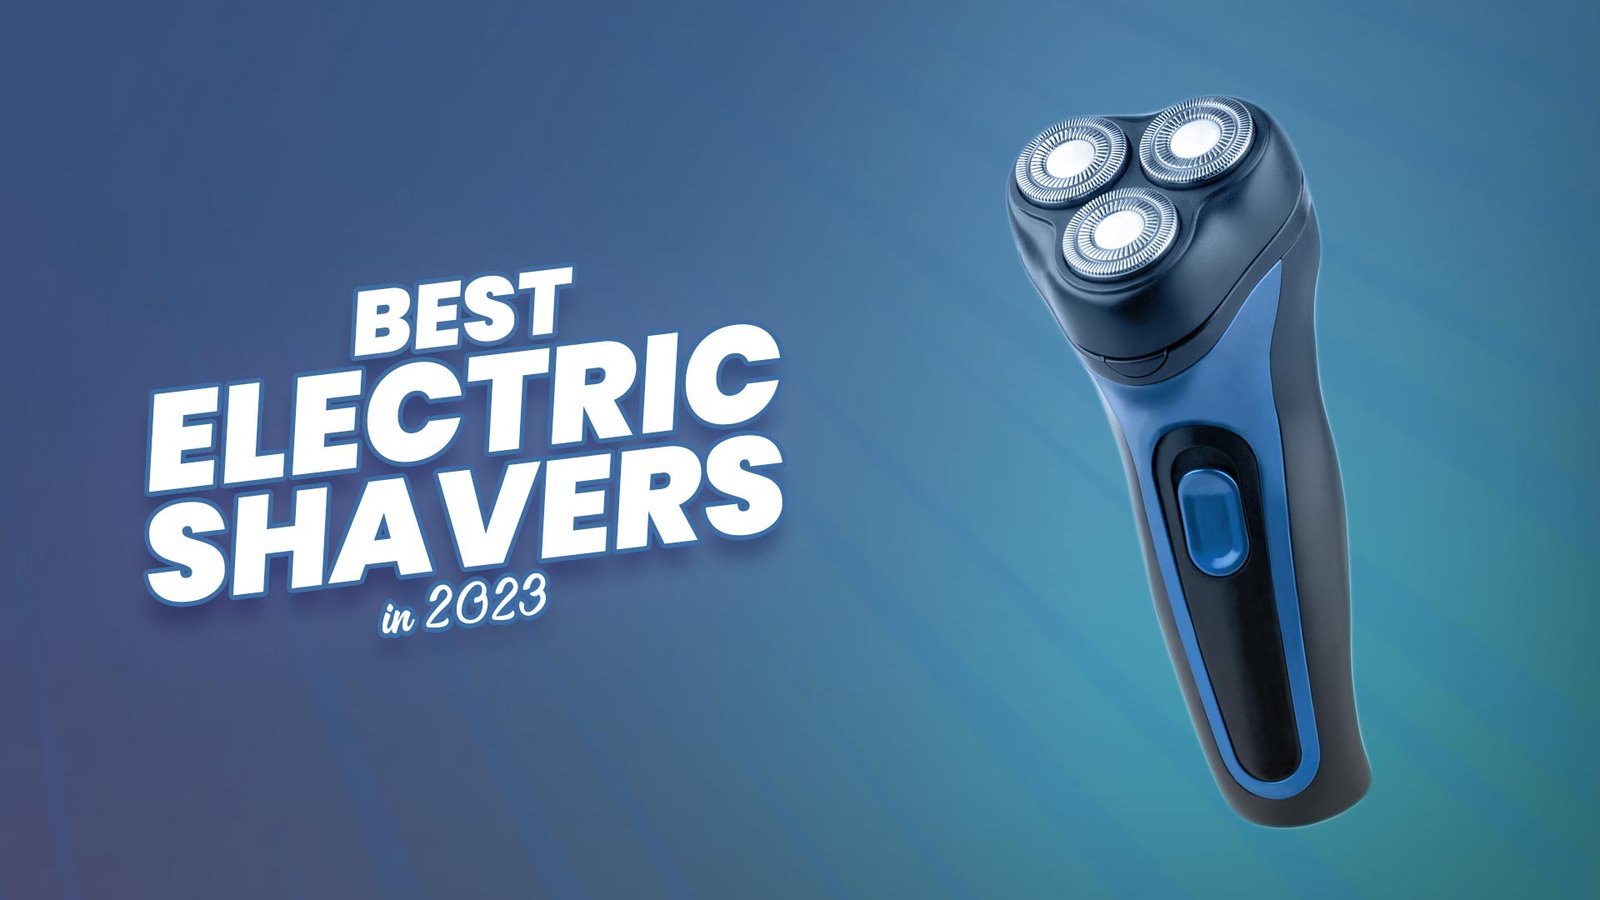 Best Electric Shavers in 2023